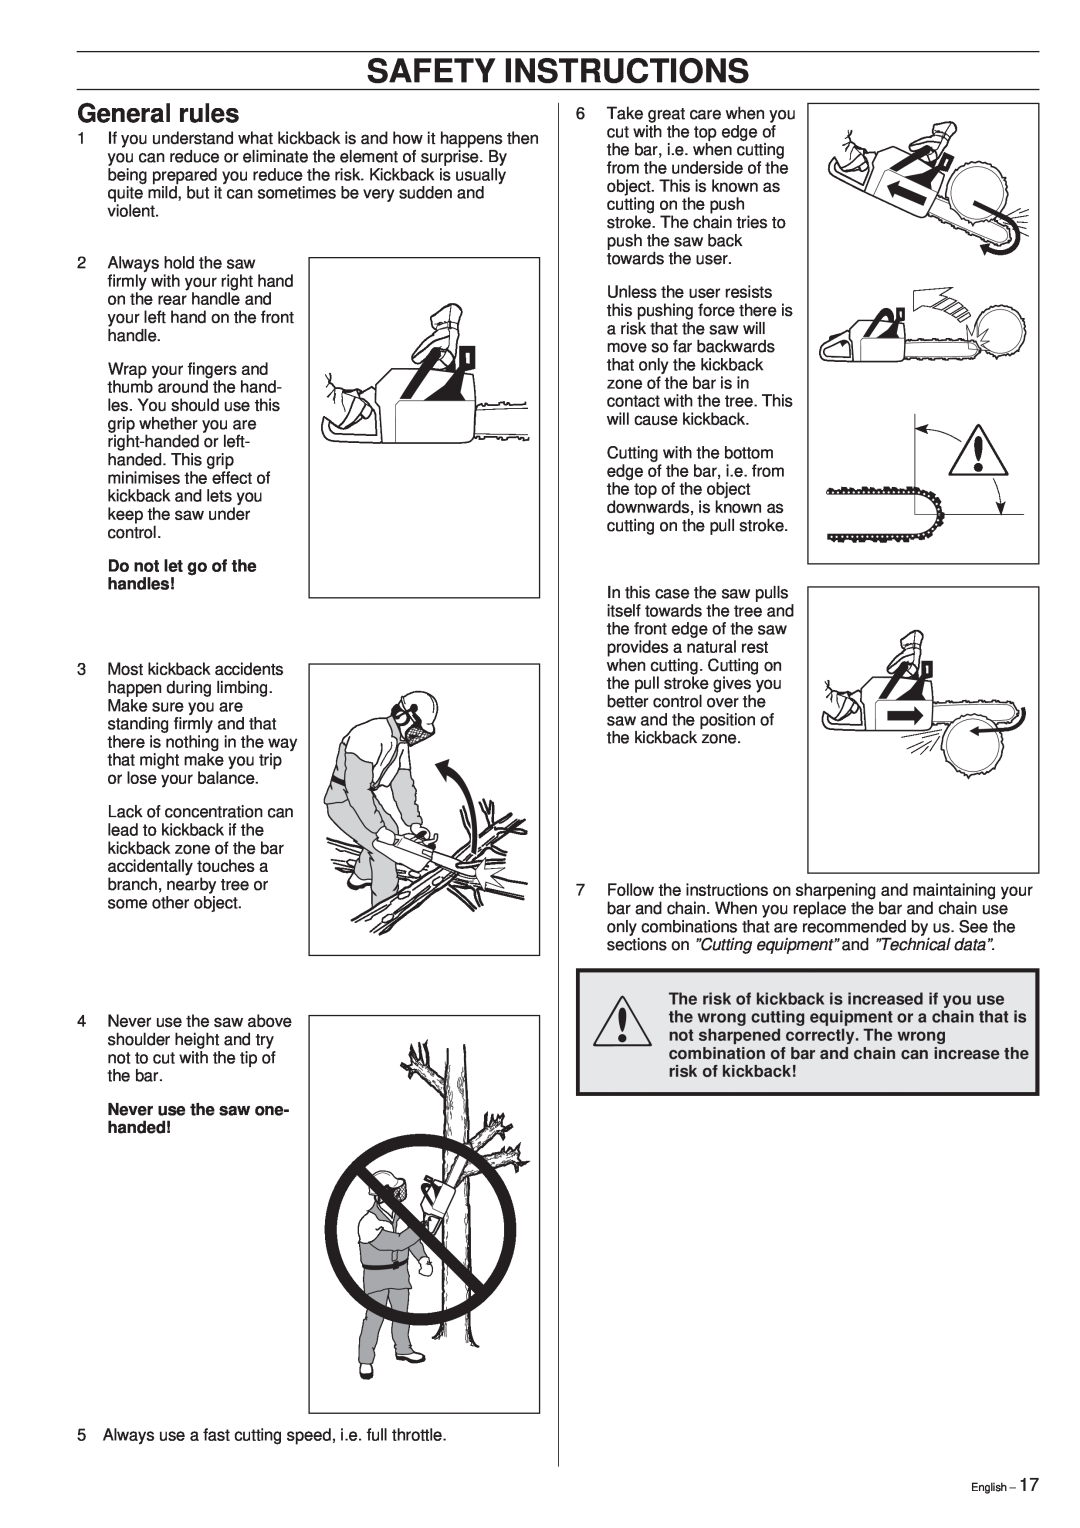 Husqvarna 40 manual General rules, Safety Instructions, Do not let go of the handles, Never use the saw one- handed 